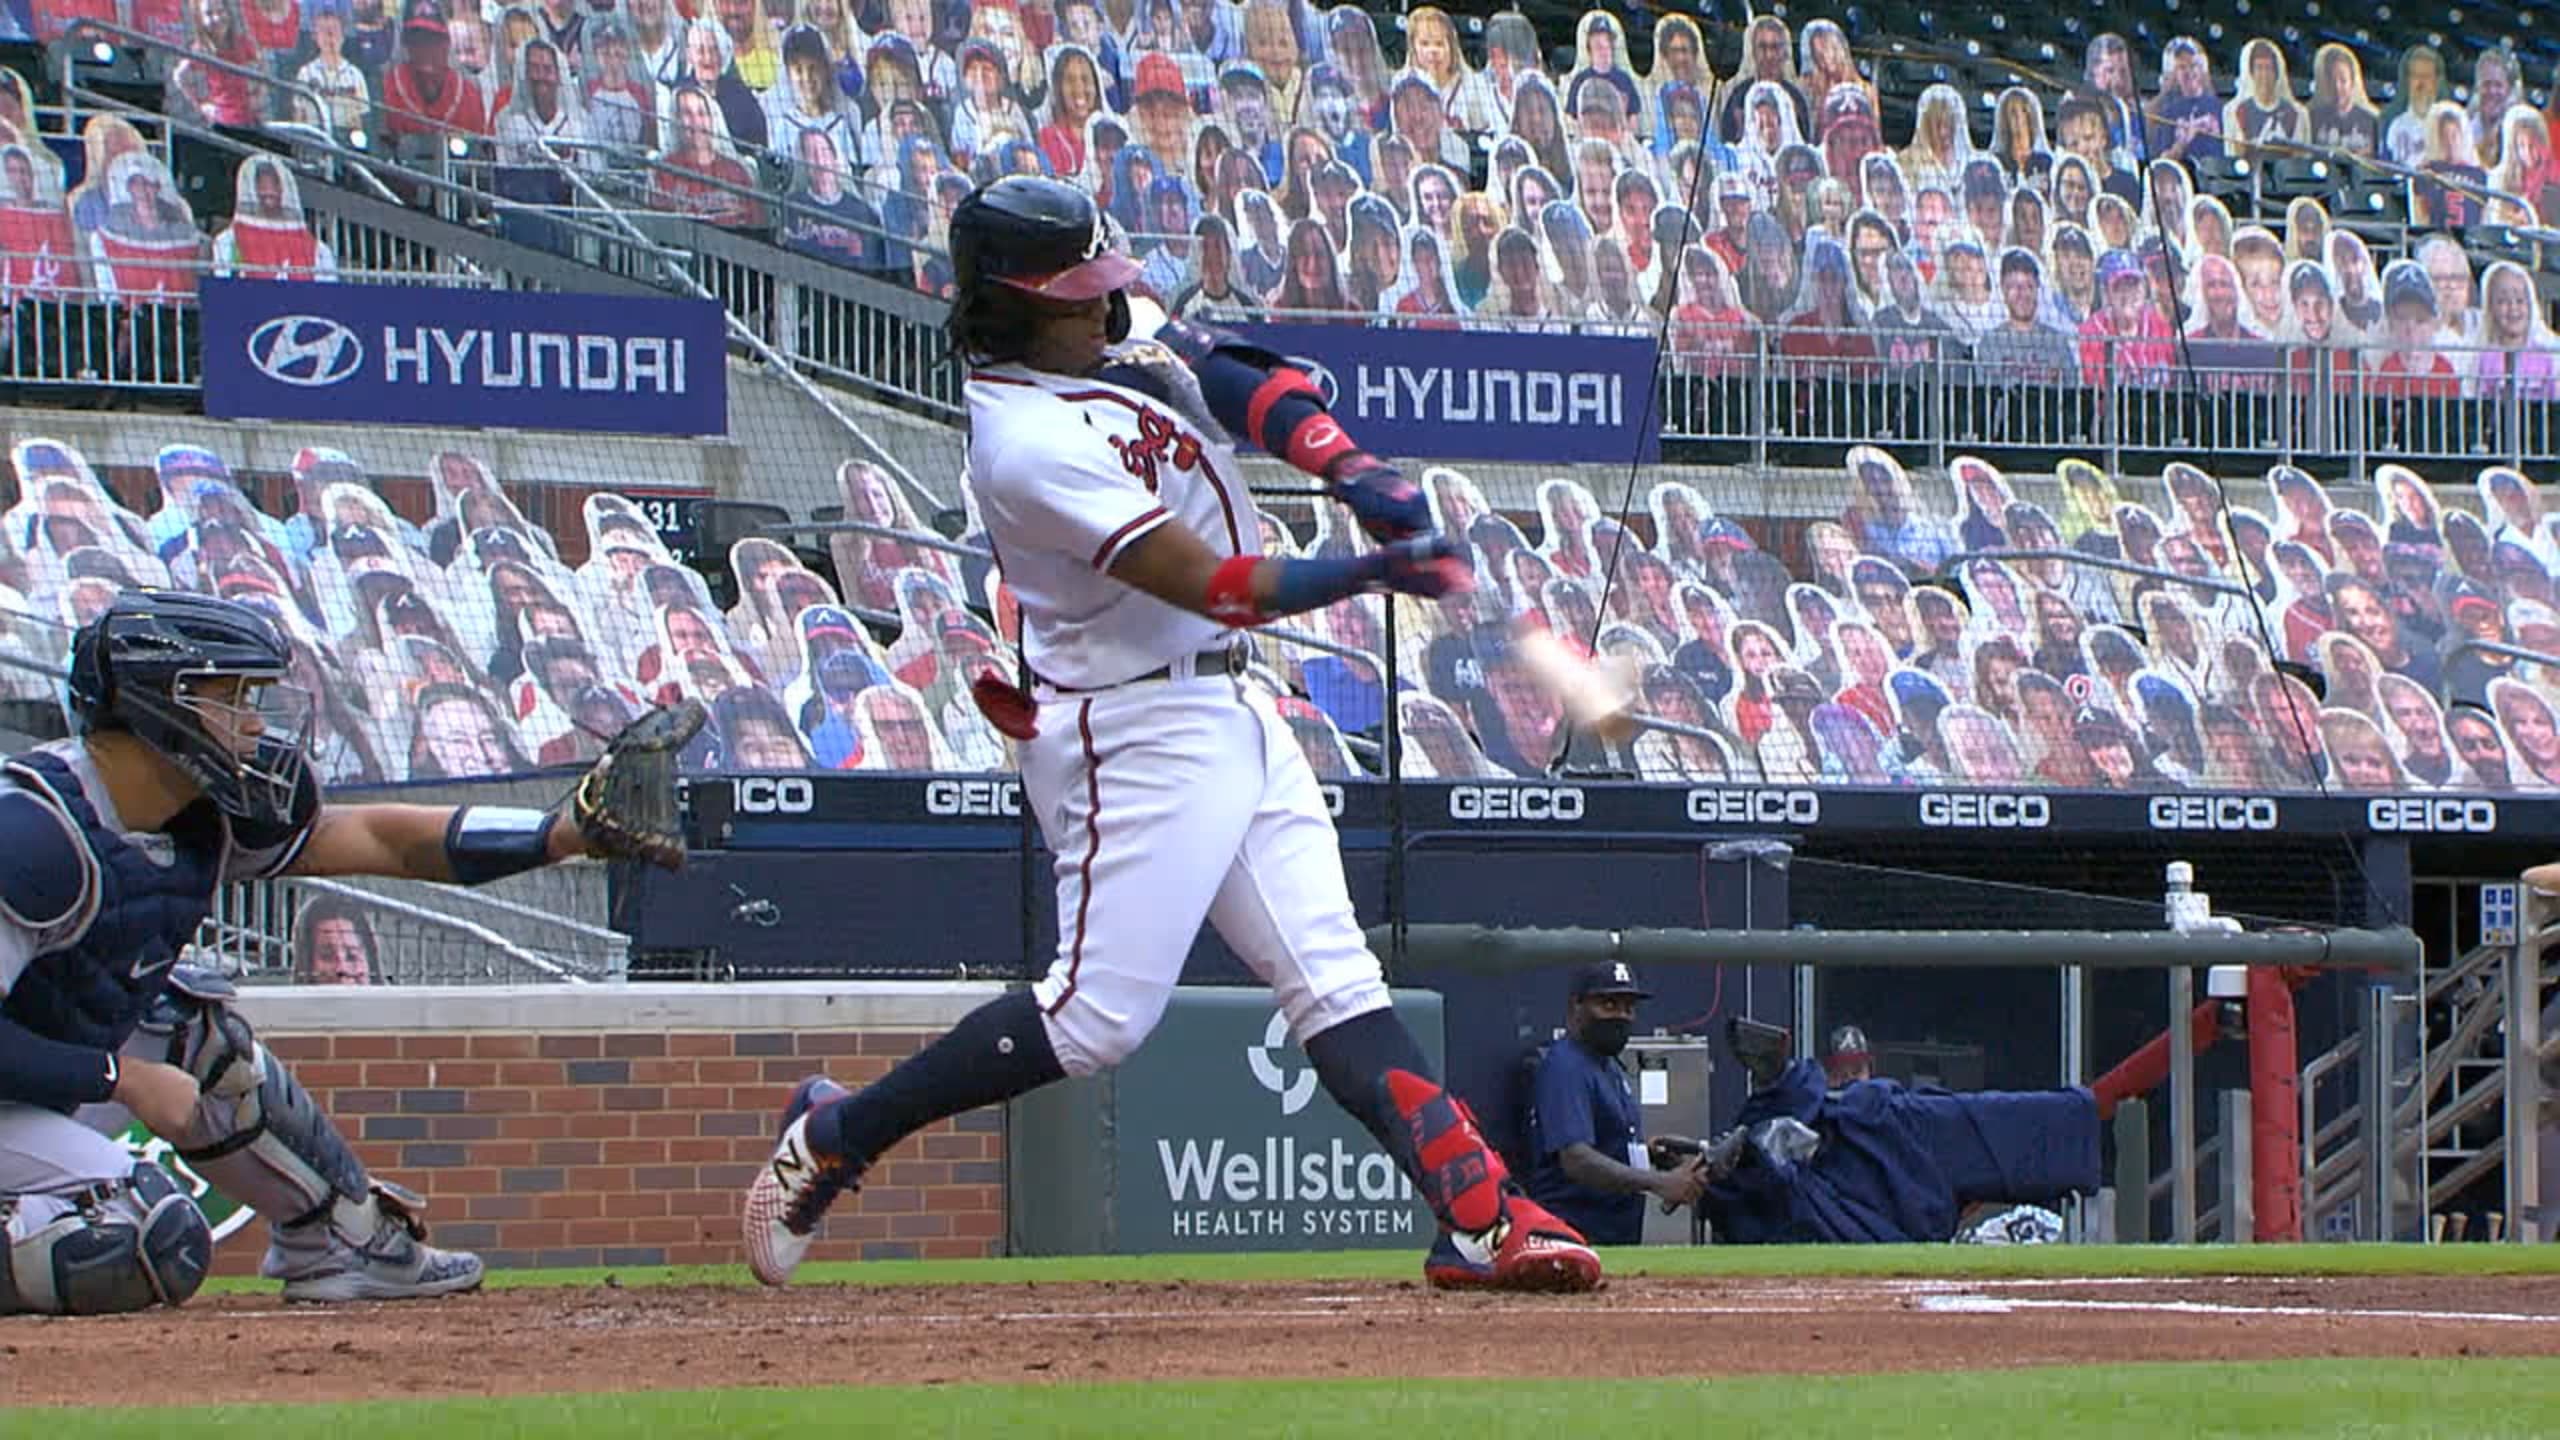 Ronald Acuña Jr. Robs & Hits a Home Run In the Same Game, August 15, 2019